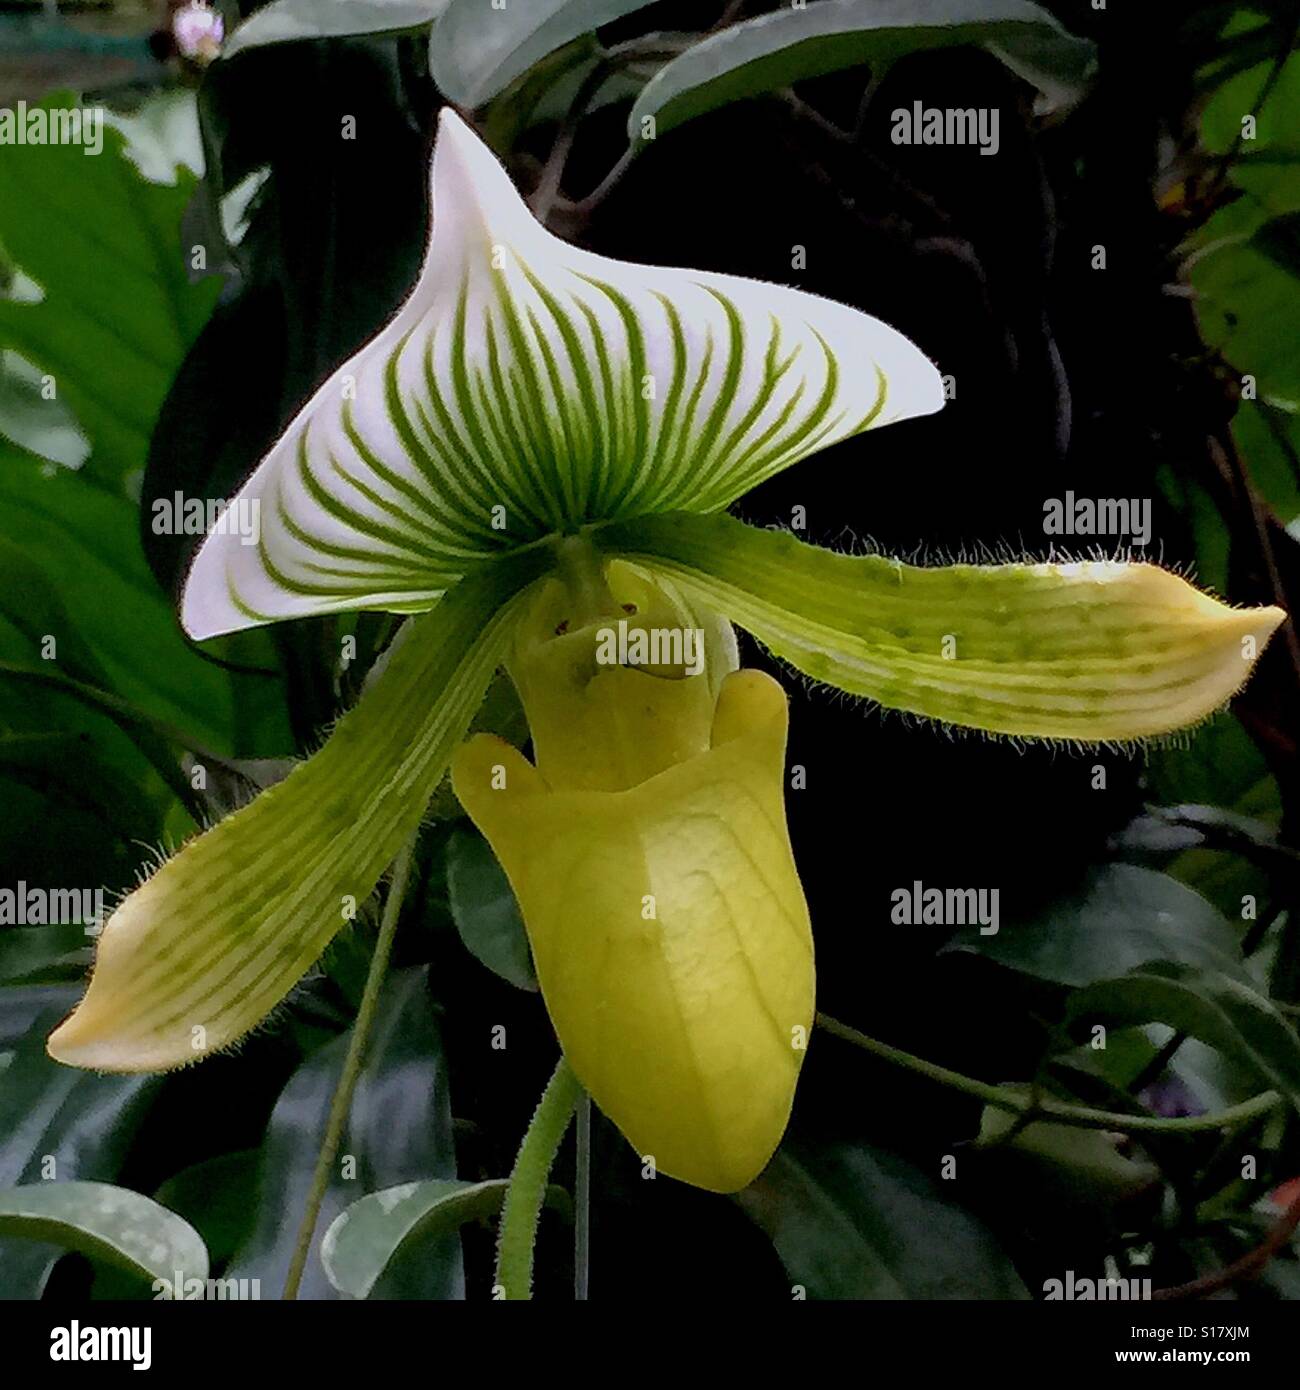 Paphiopedilum Maudiae Green - Singapore National Orchid Garden orchid collection at the Singapore Botanic Garden, a UNESCO world heritage site Stock Photo